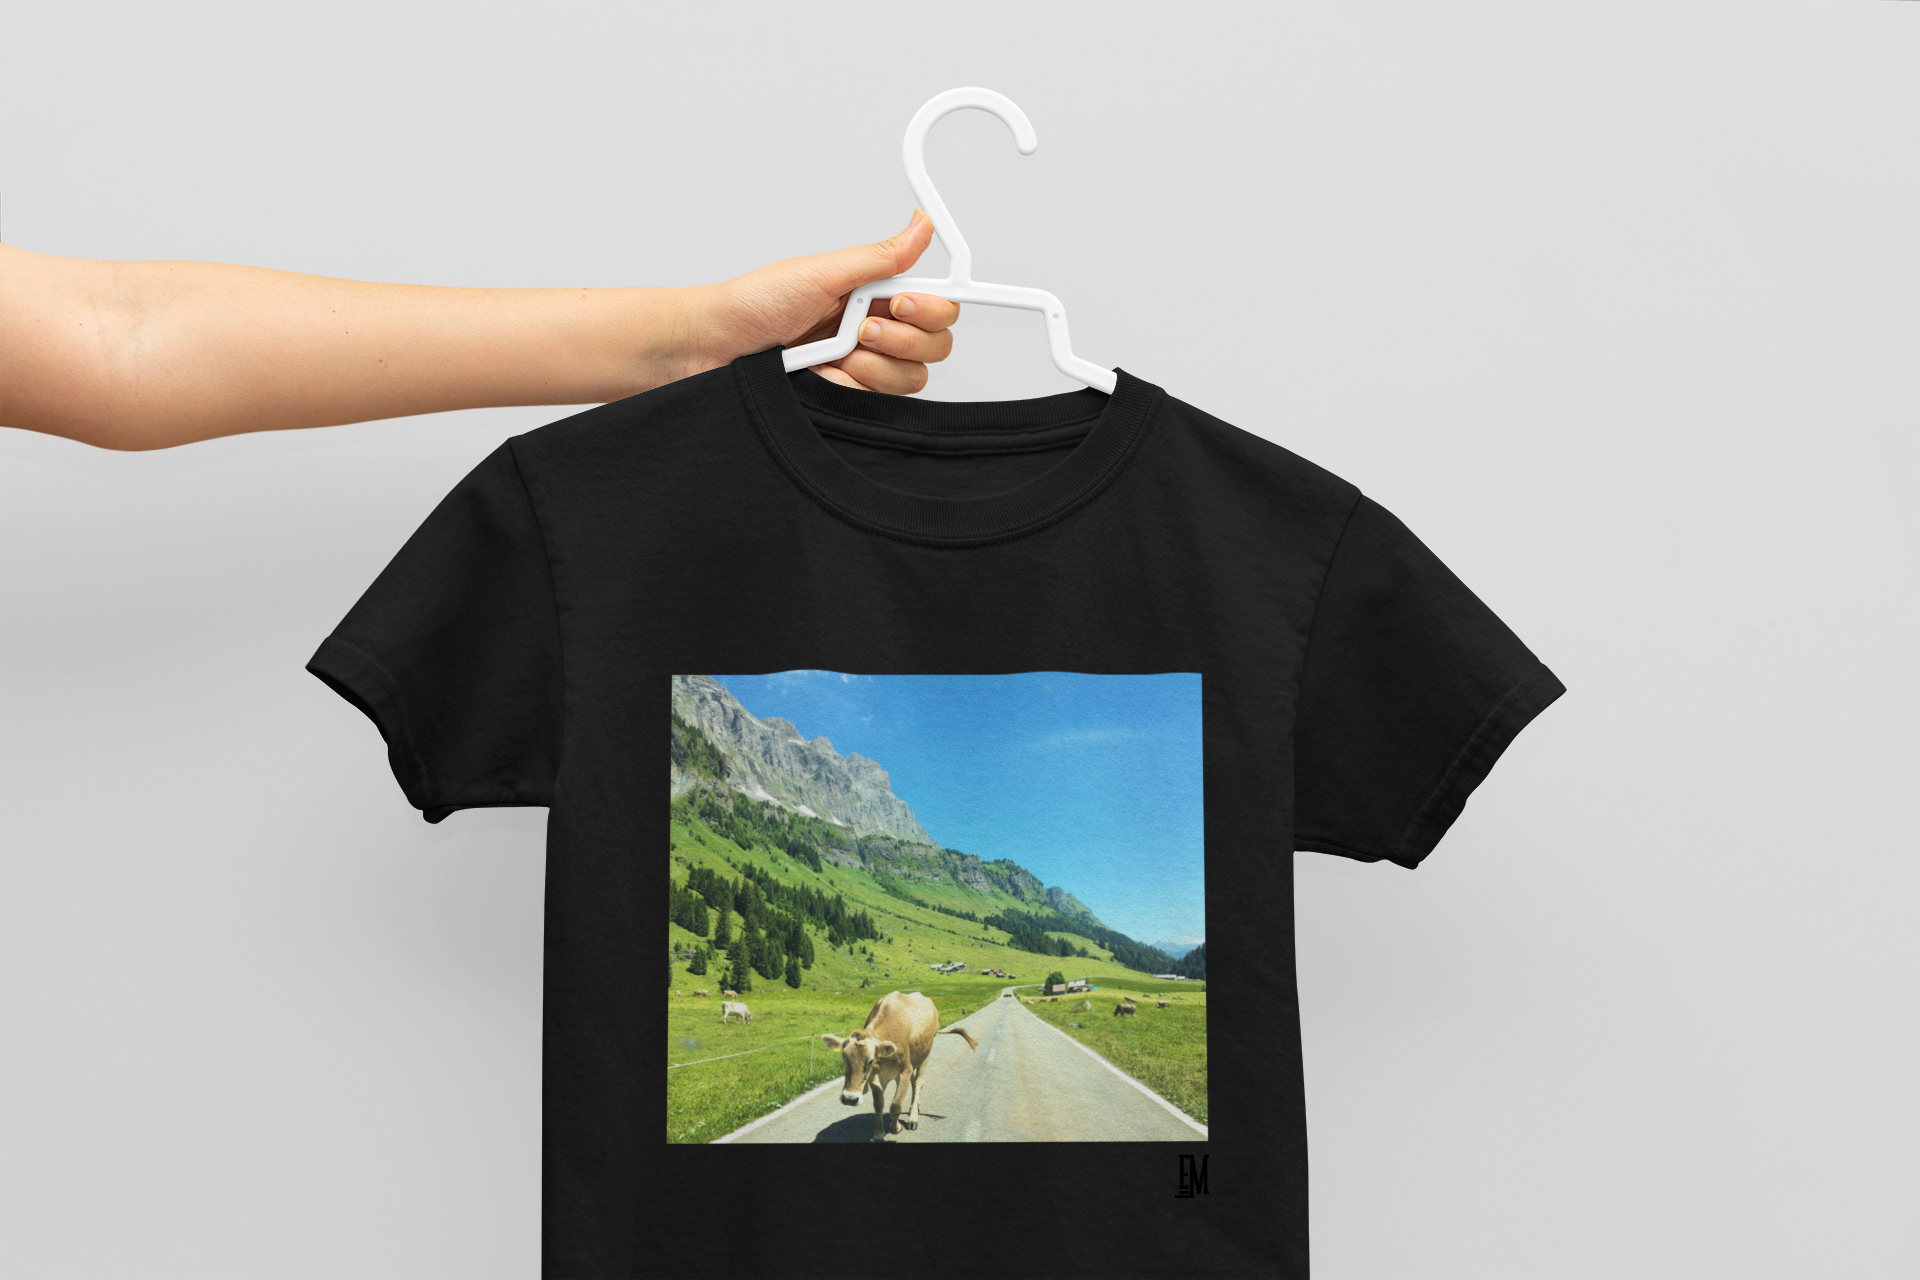 mockup-of-a-woman-holding-a-kids-t-shirt-33937-2.png